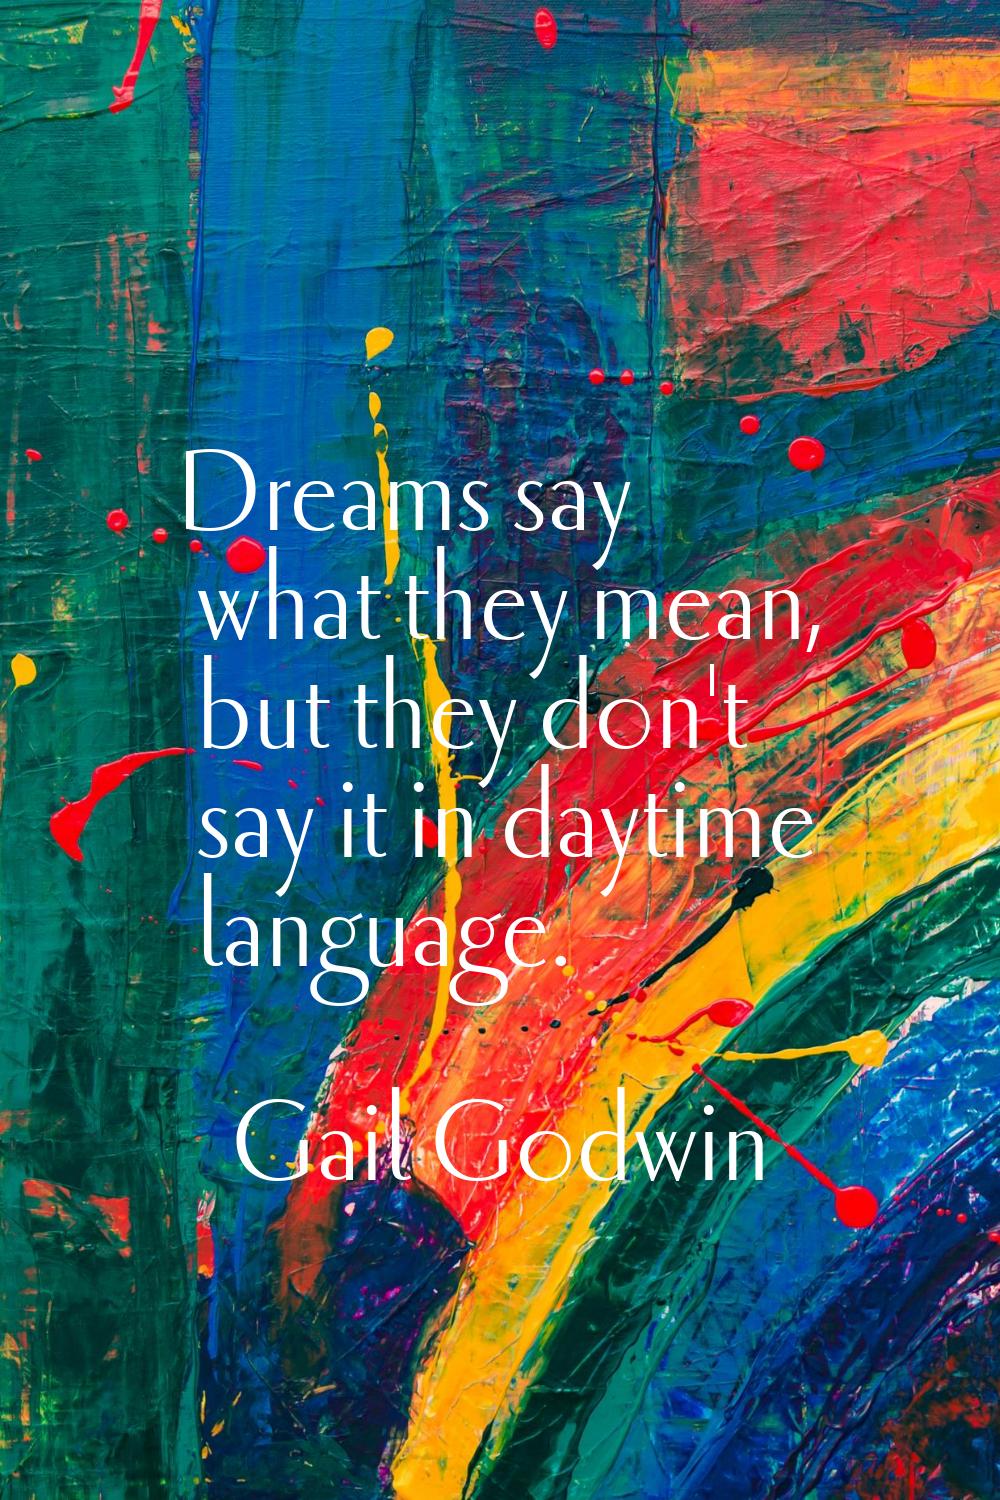 Dreams say what they mean, but they don't say it in daytime language.